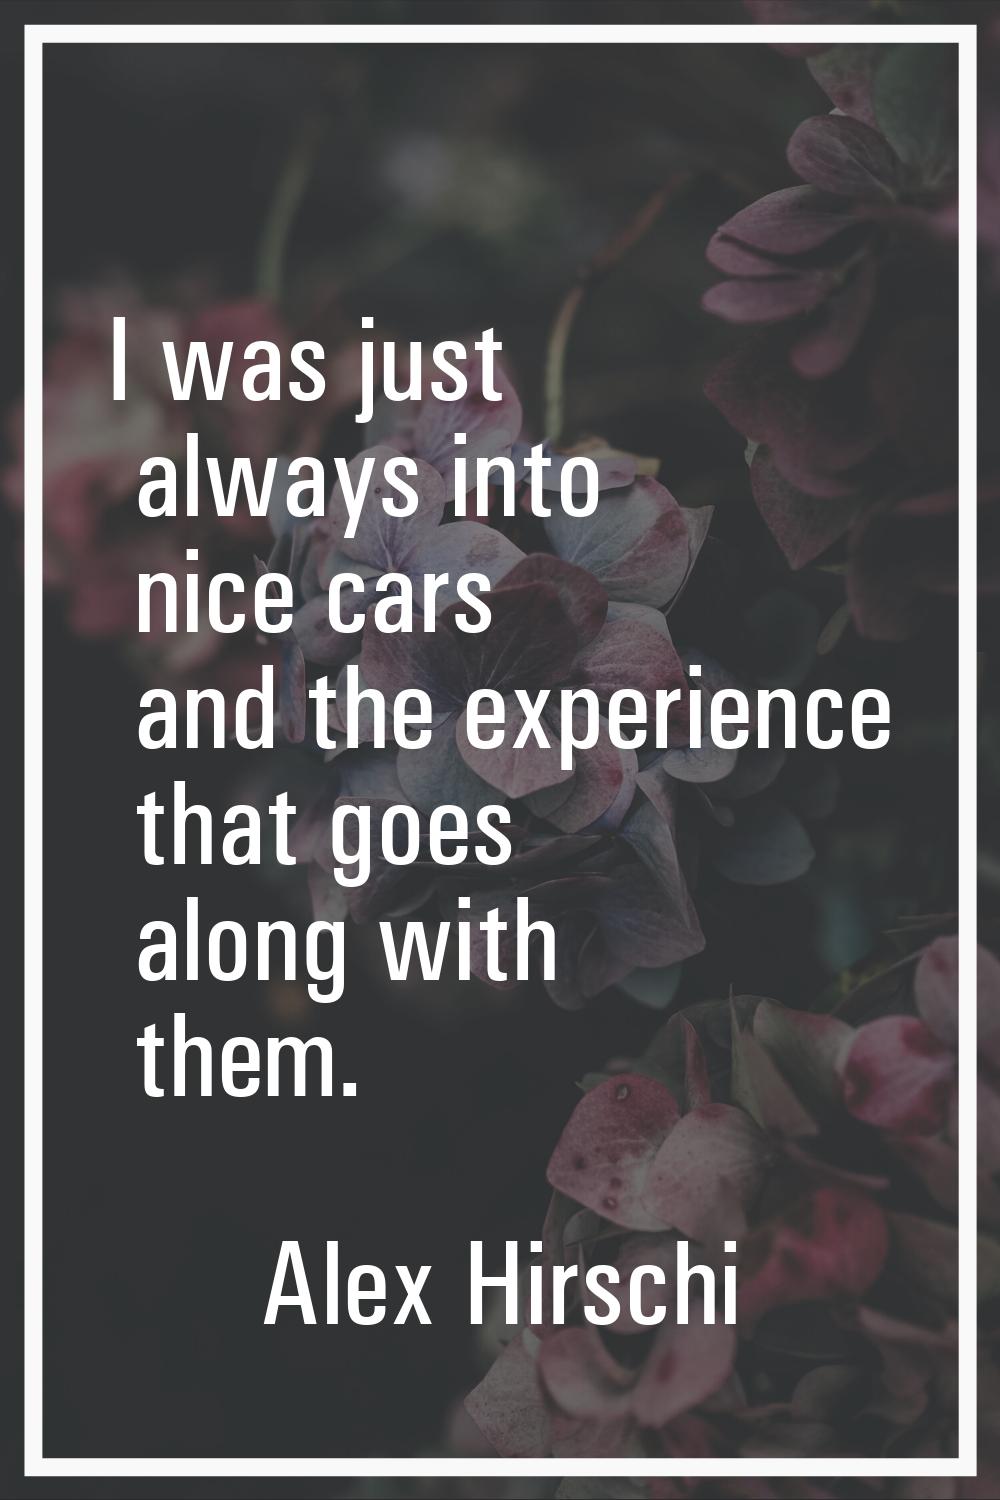 I was just always into nice cars and the experience that goes along with them.